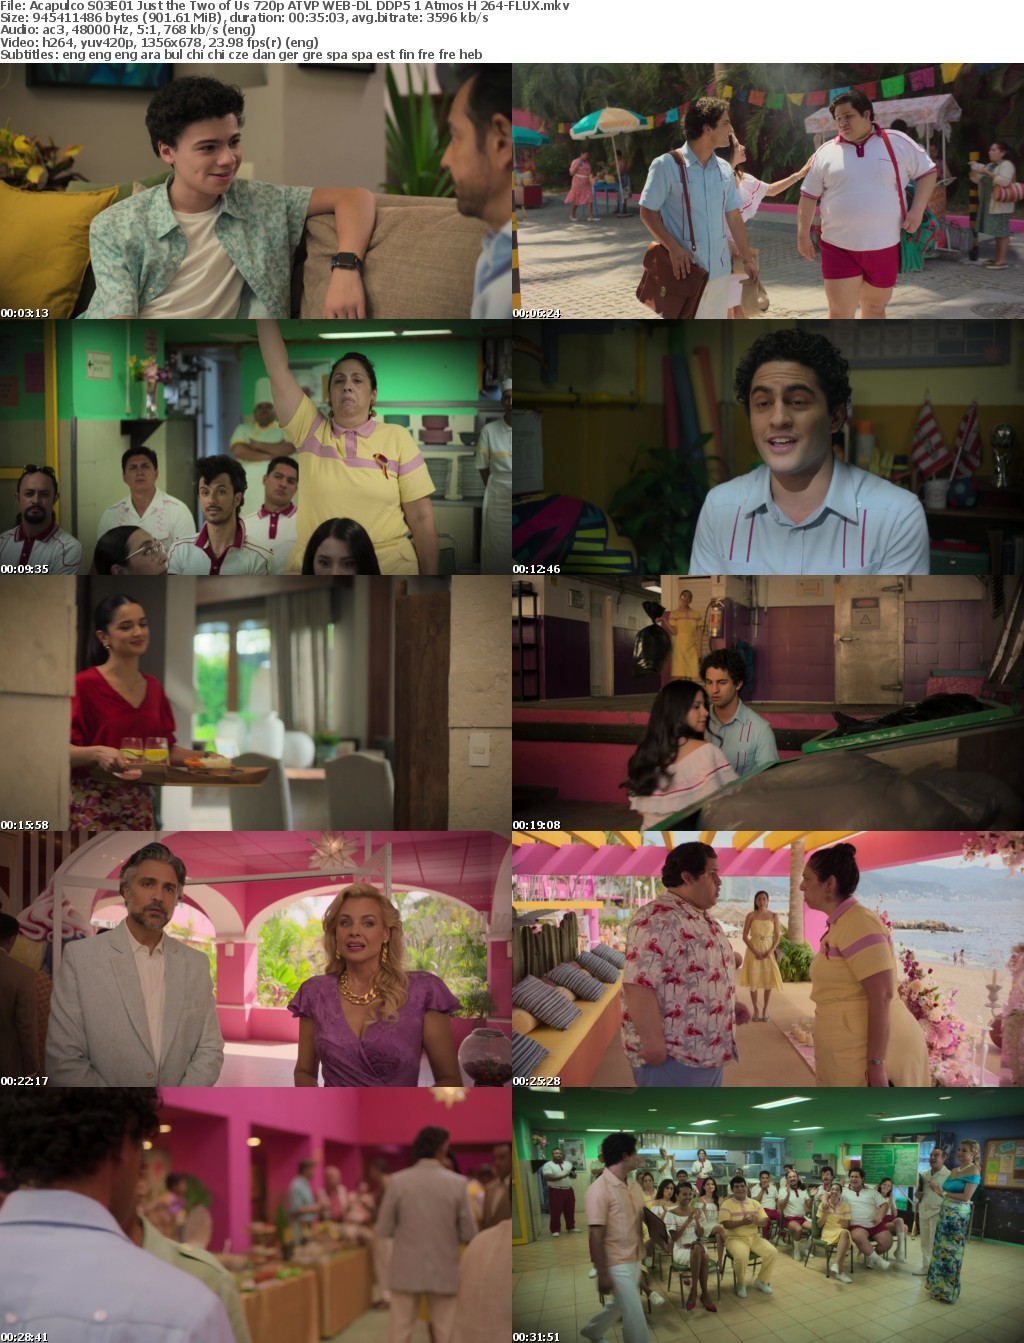 Acapulco S03E01 Just the Two of Us 720p ATVP WEB-DL DDP5 1 Atmos H 264-FLUX